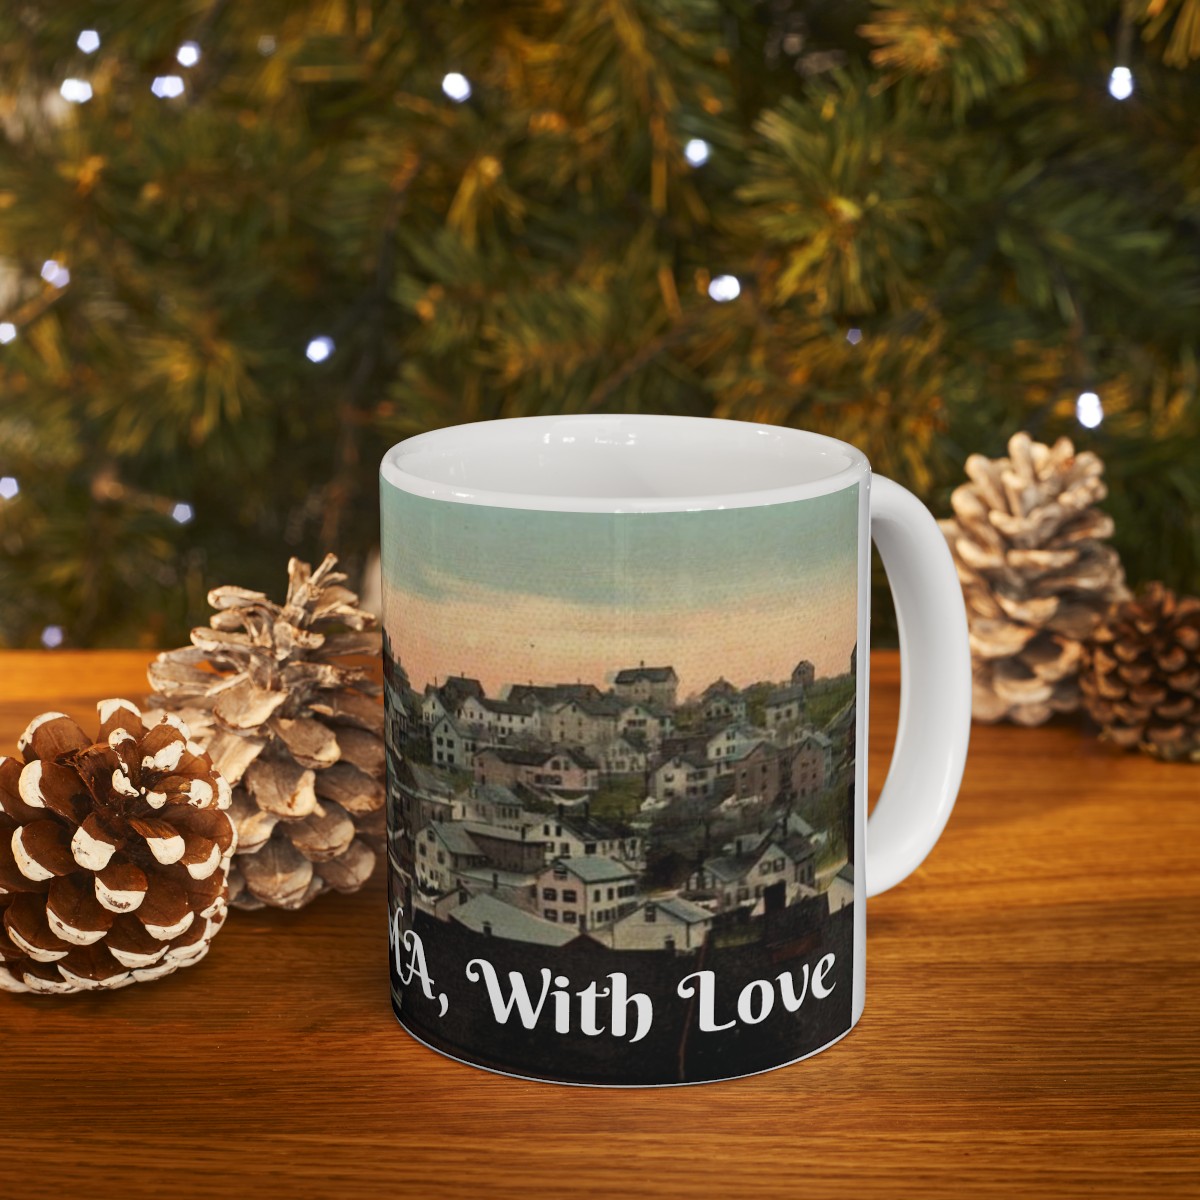 From Spencer, MA, With Love  - Vintage Postcard - Ceramic Mug 11oz product thumbnail image